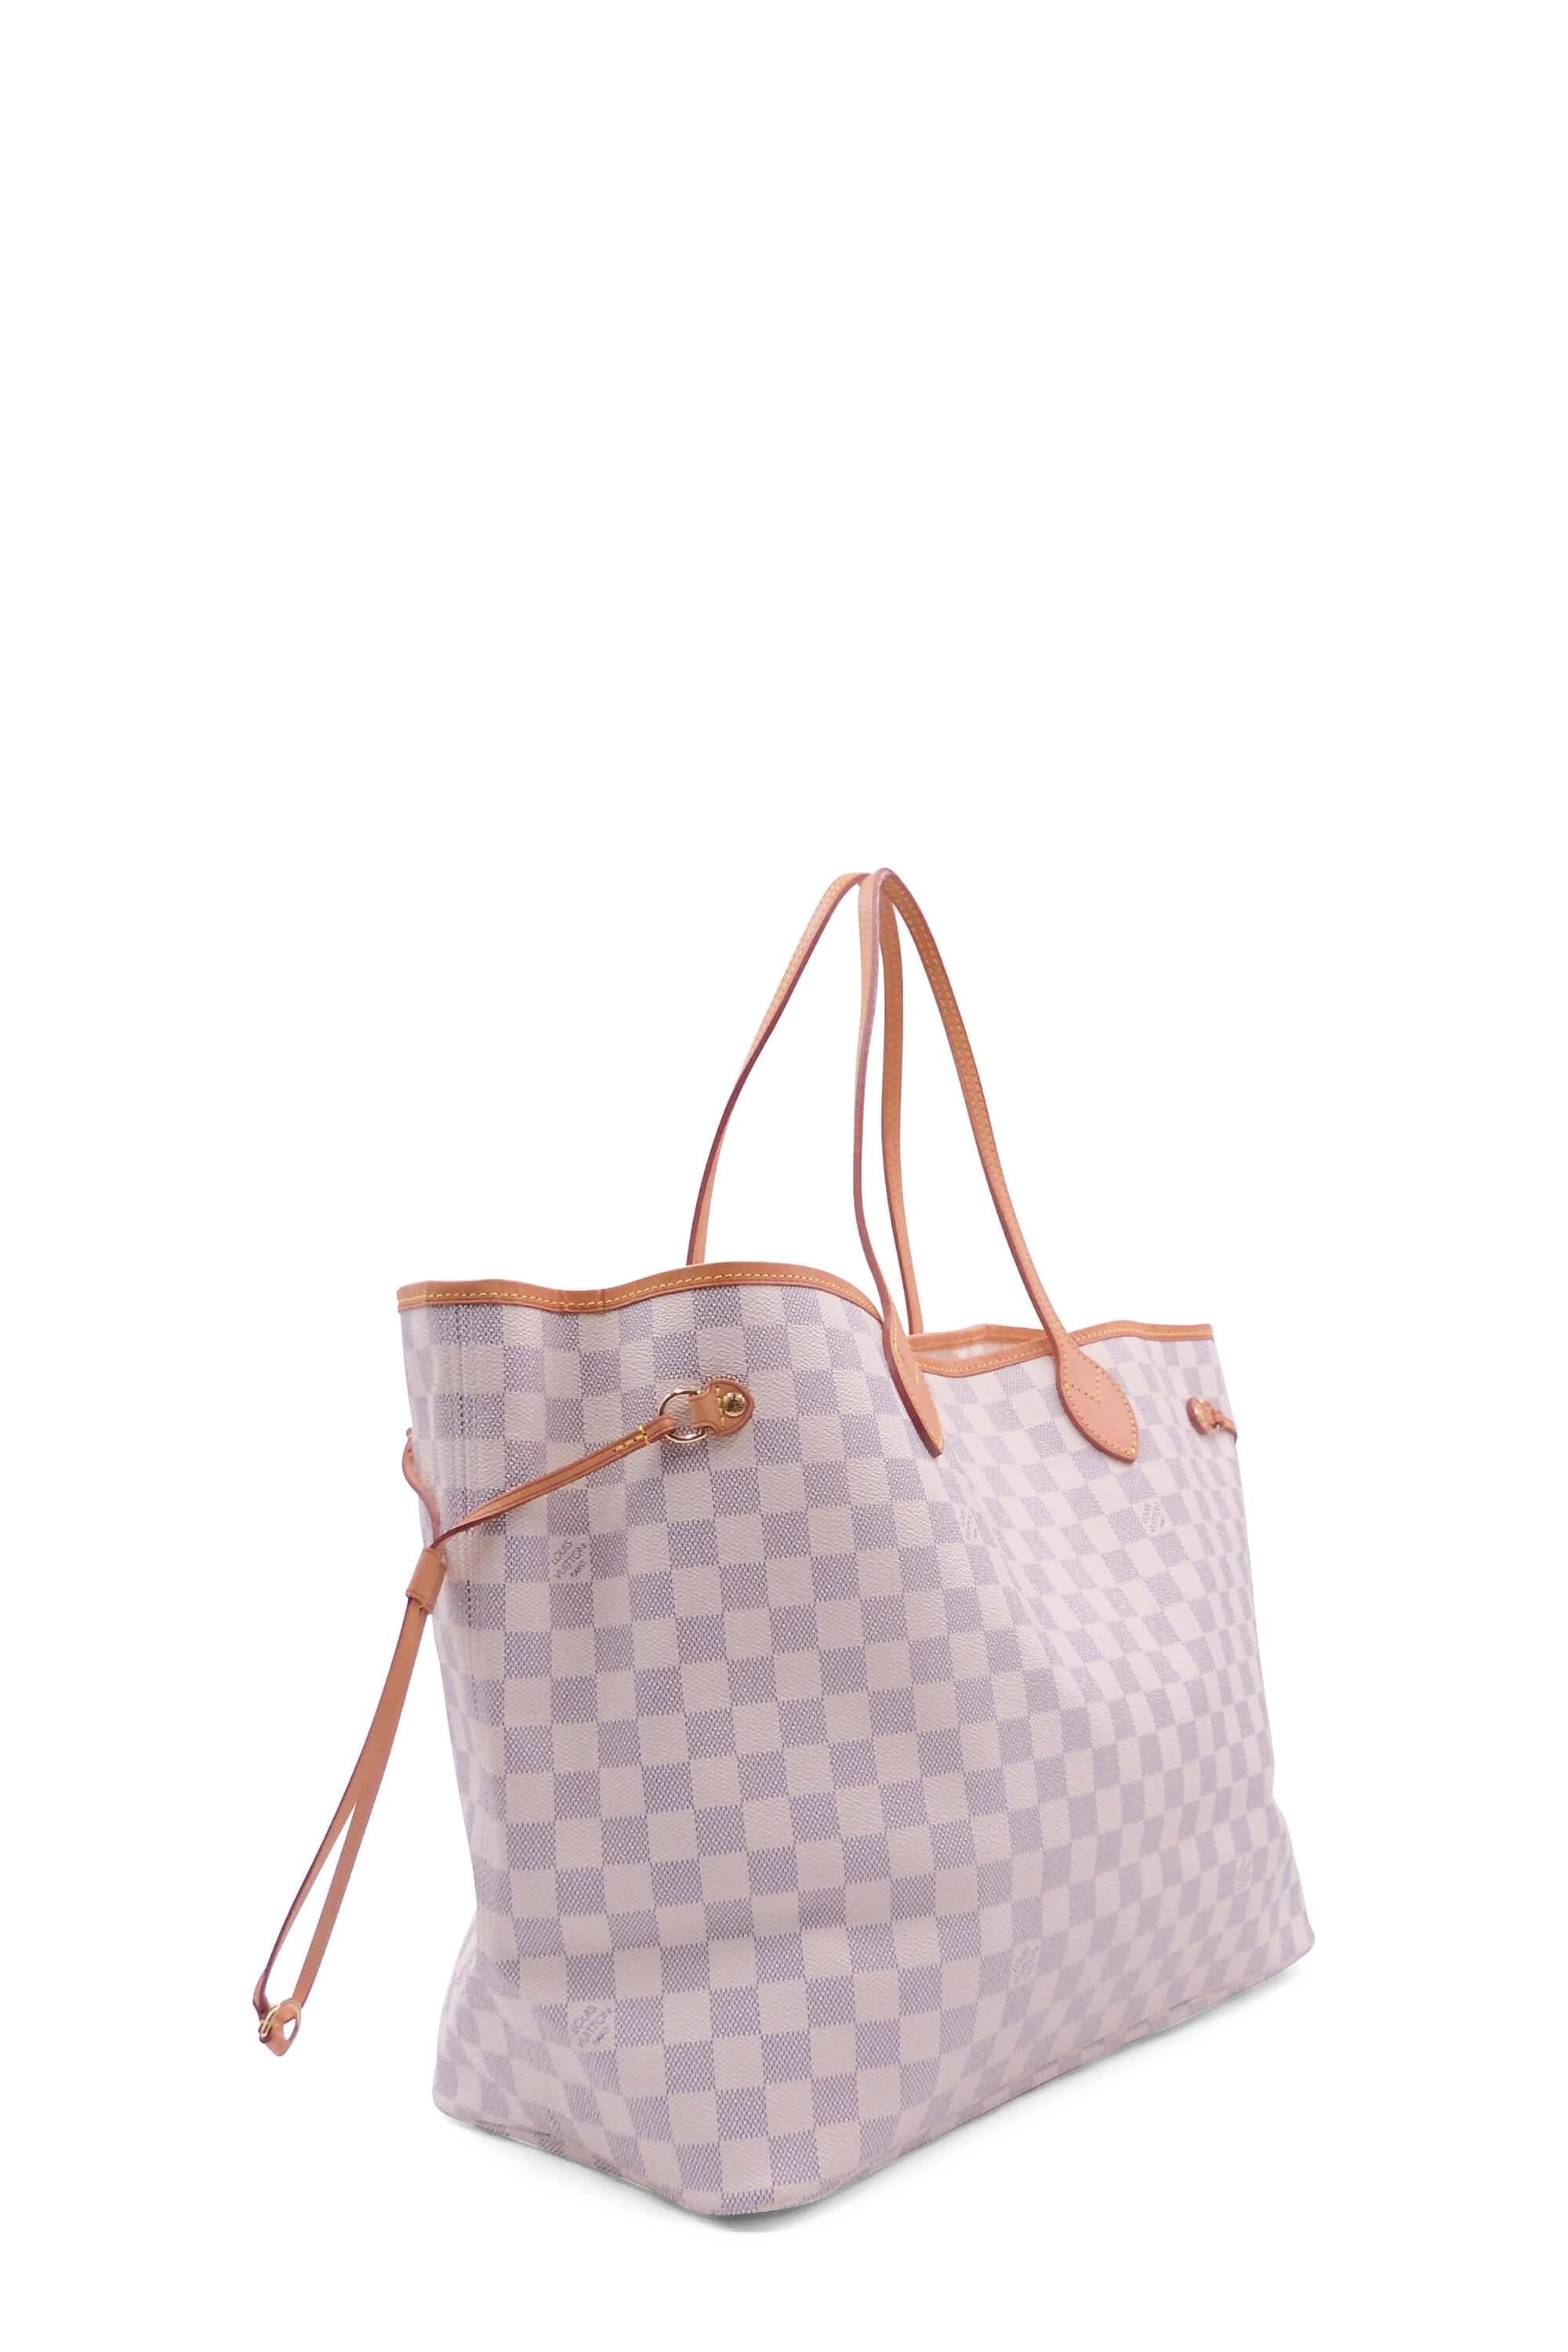 Buy Authentic, Preloved Louis Vuitton Neverfull Damier Azur GM